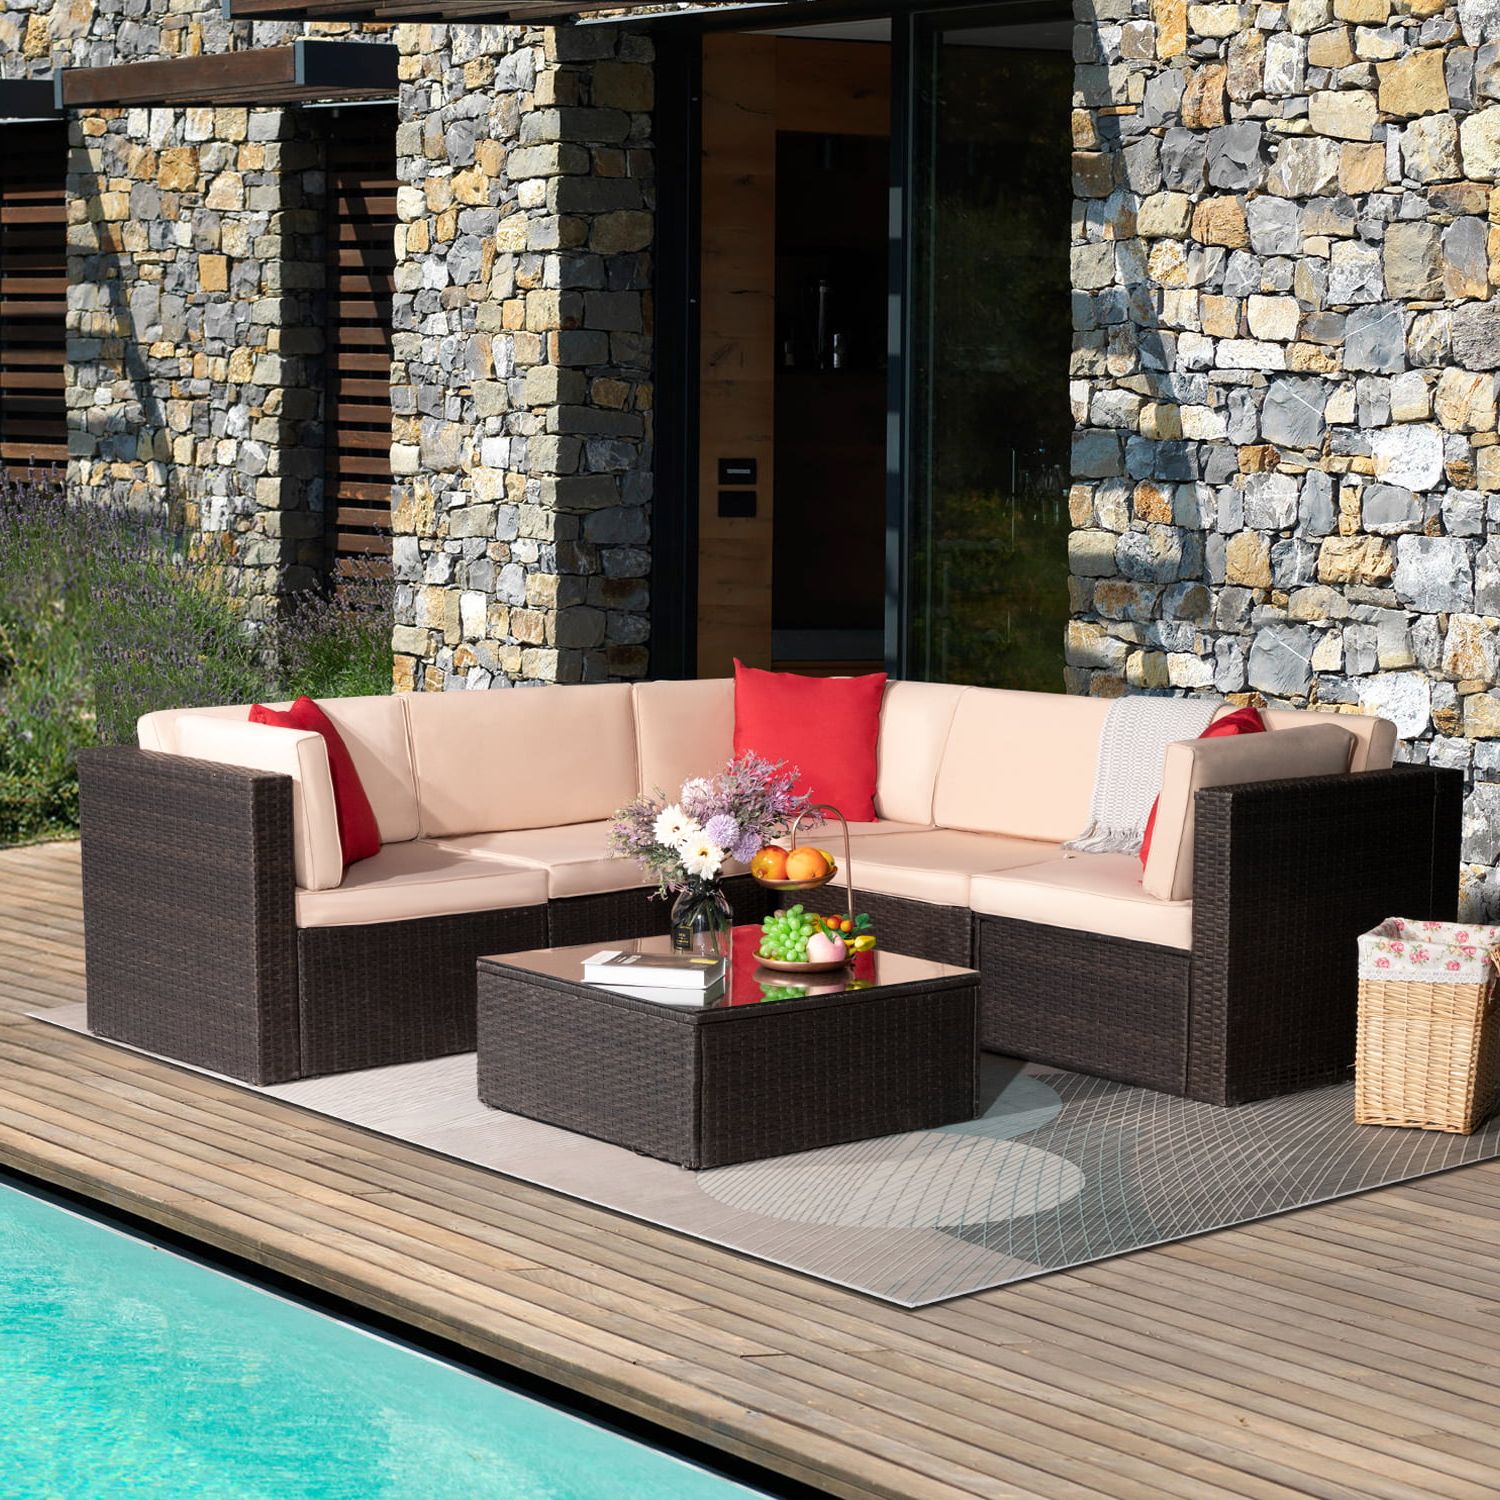 Lacoo 6 Pieces Patio Sectional Sofa All Weather Pe Rattan Manual Wicker  Conversation Sets With Washable Cushions And Glass Table (brown) –  Walmart With Regard To Most Up To Date Outdoor Rattan Sectional Sofas With Coffee Table (View 14 of 15)